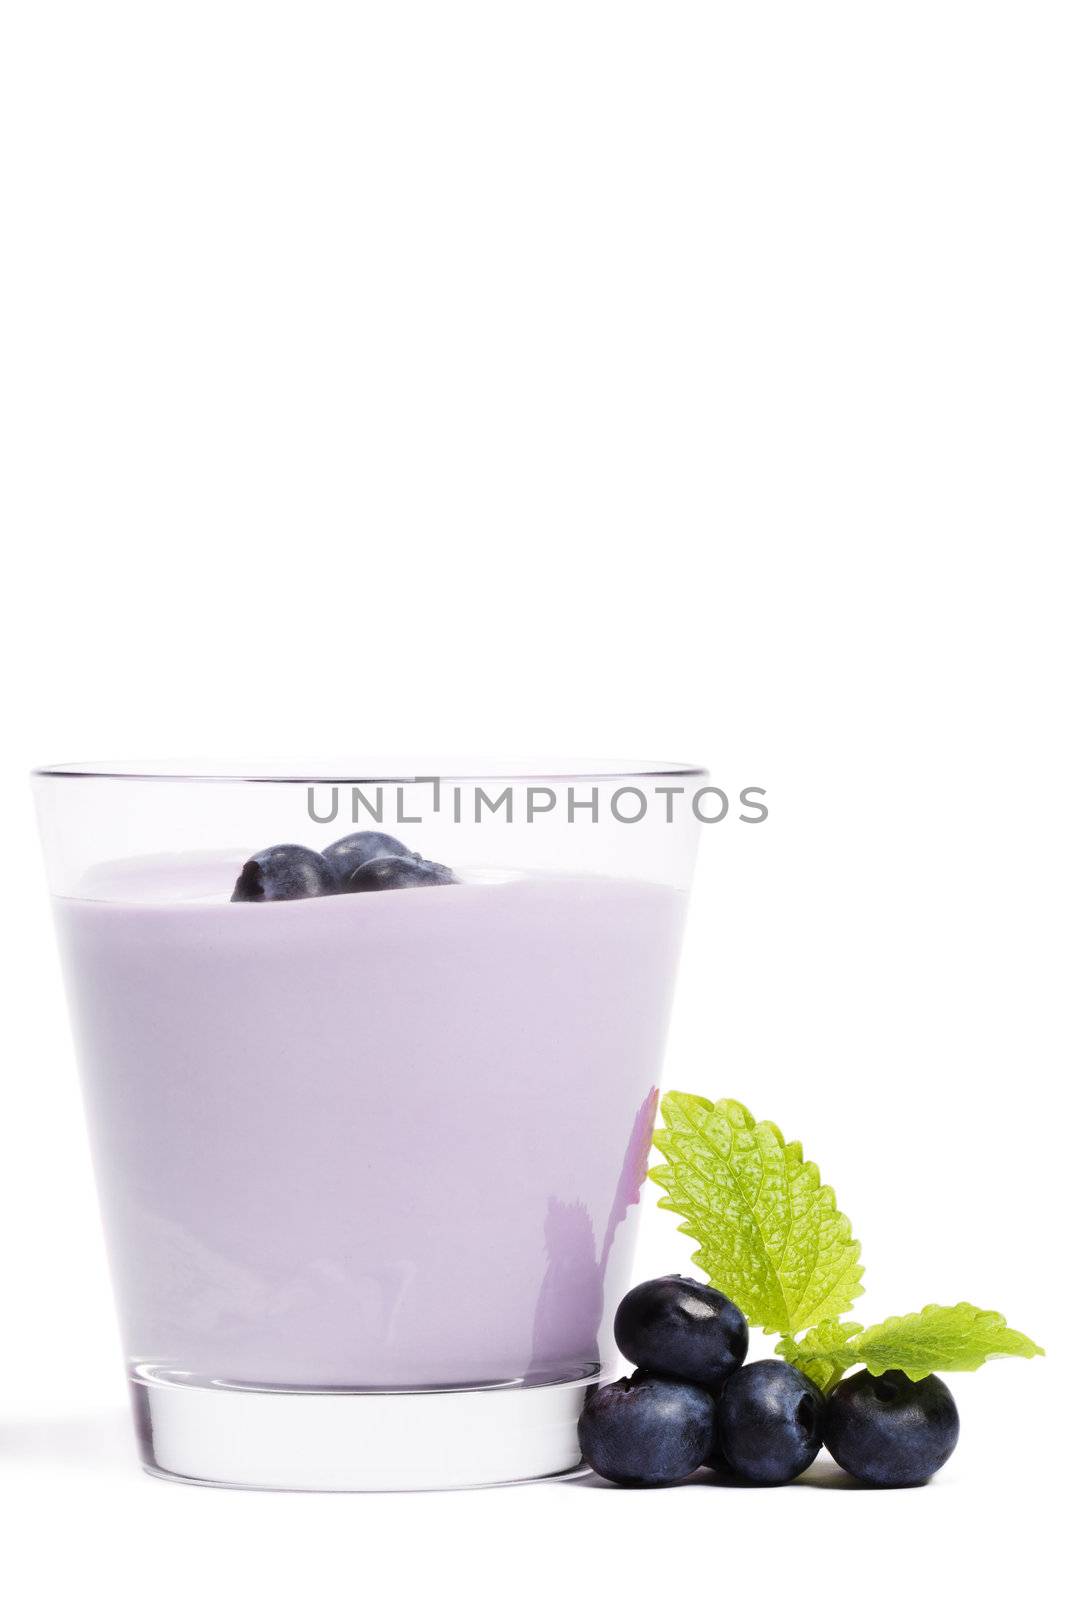 some blueberries with melissa near a milkshake with blueberries on white background